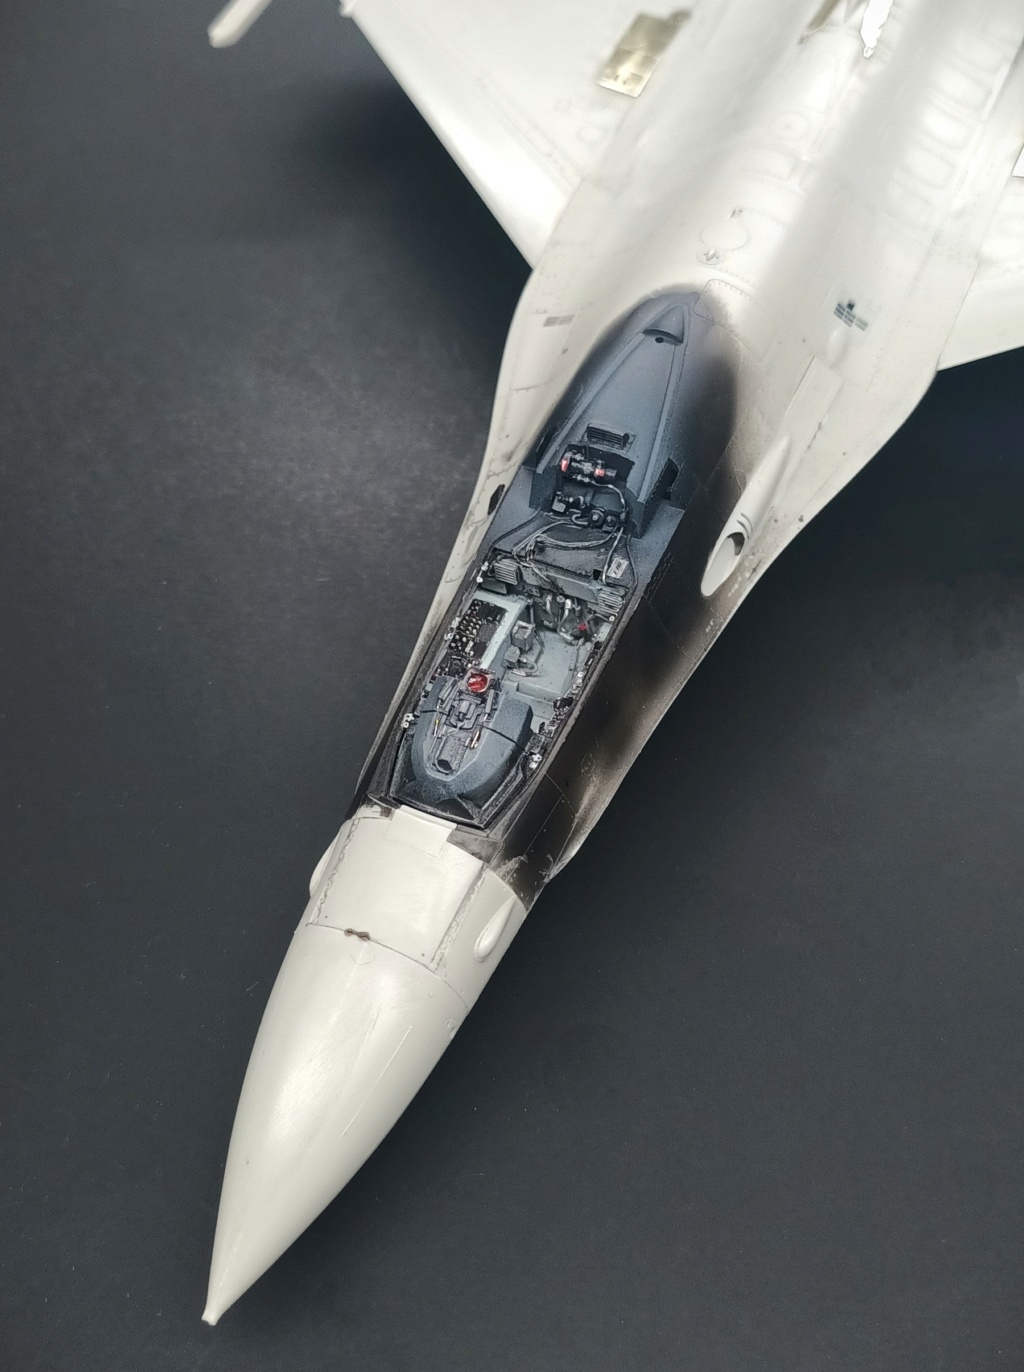 [Kinetic] 1/48  - McDonnell F/A-18A+ Hornet- VFC 12   / Double  [Tamiya] General Dynamics F-16C Fighting Falcon - 64th AGRS  1/48  - Aggressor - Page 3 20240212